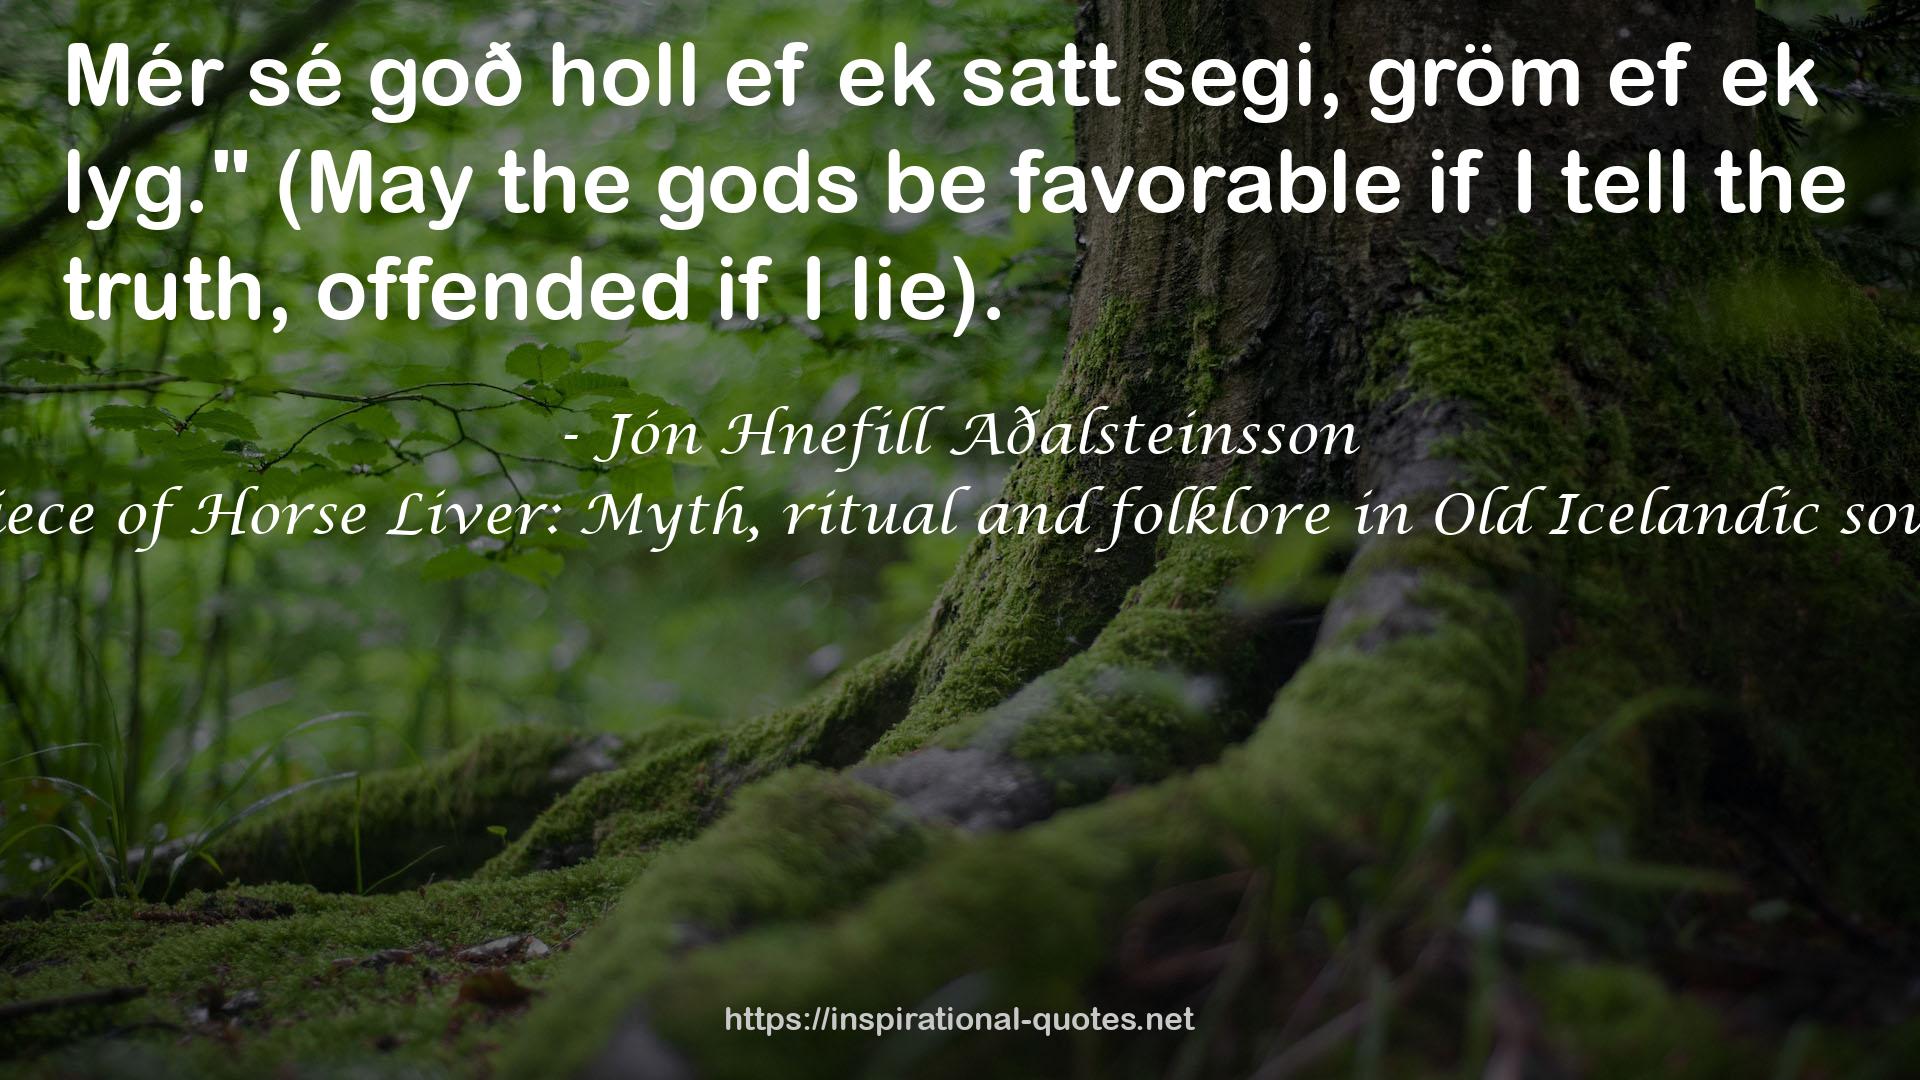 A Piece of Horse Liver: Myth, ritual and folklore in Old Icelandic sources QUOTES